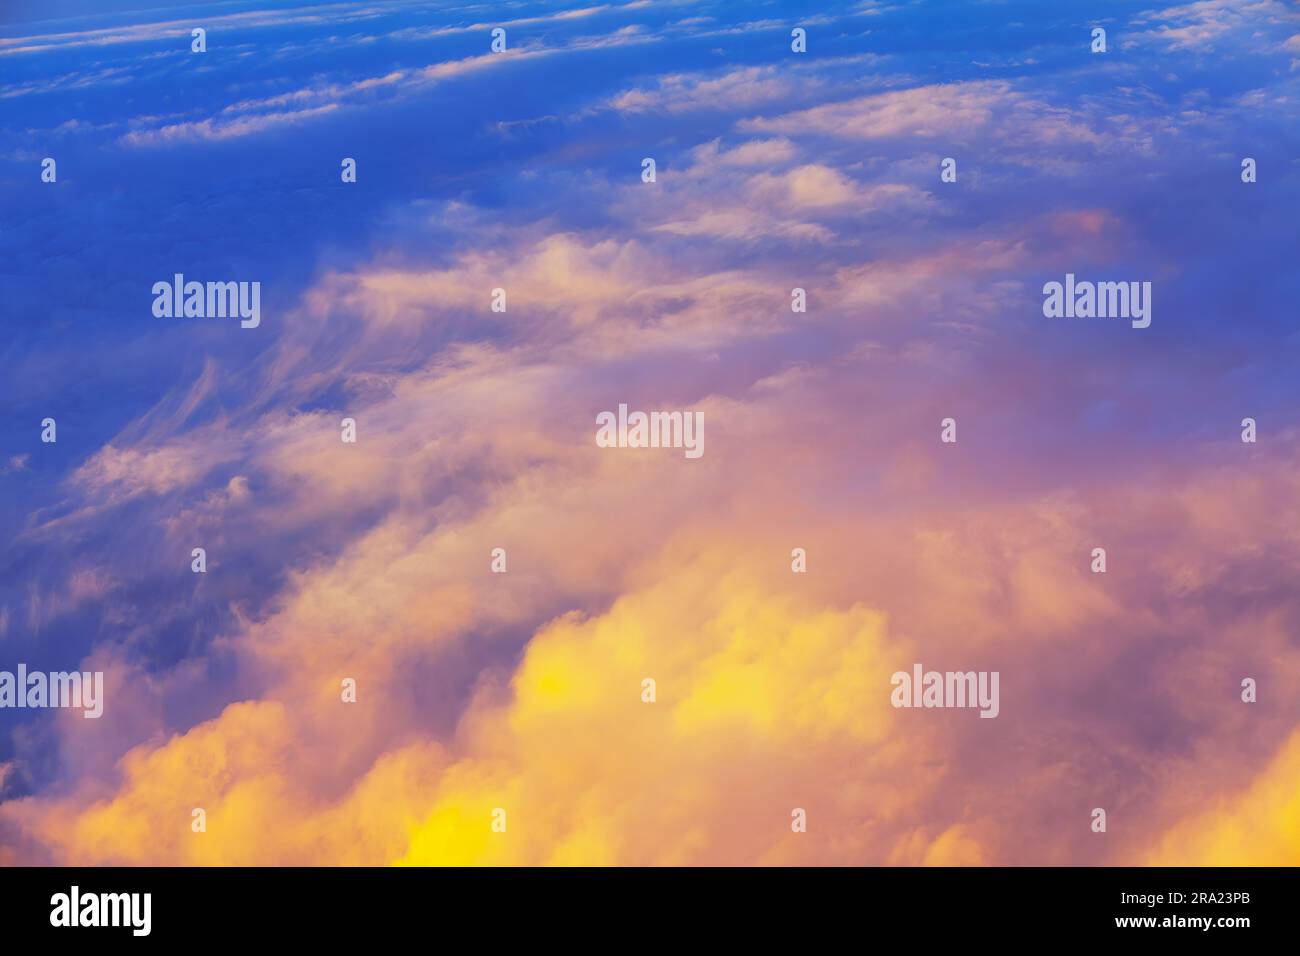 Beautiful cloudscape at sunset as seen through window of an aircraft Stock Photo